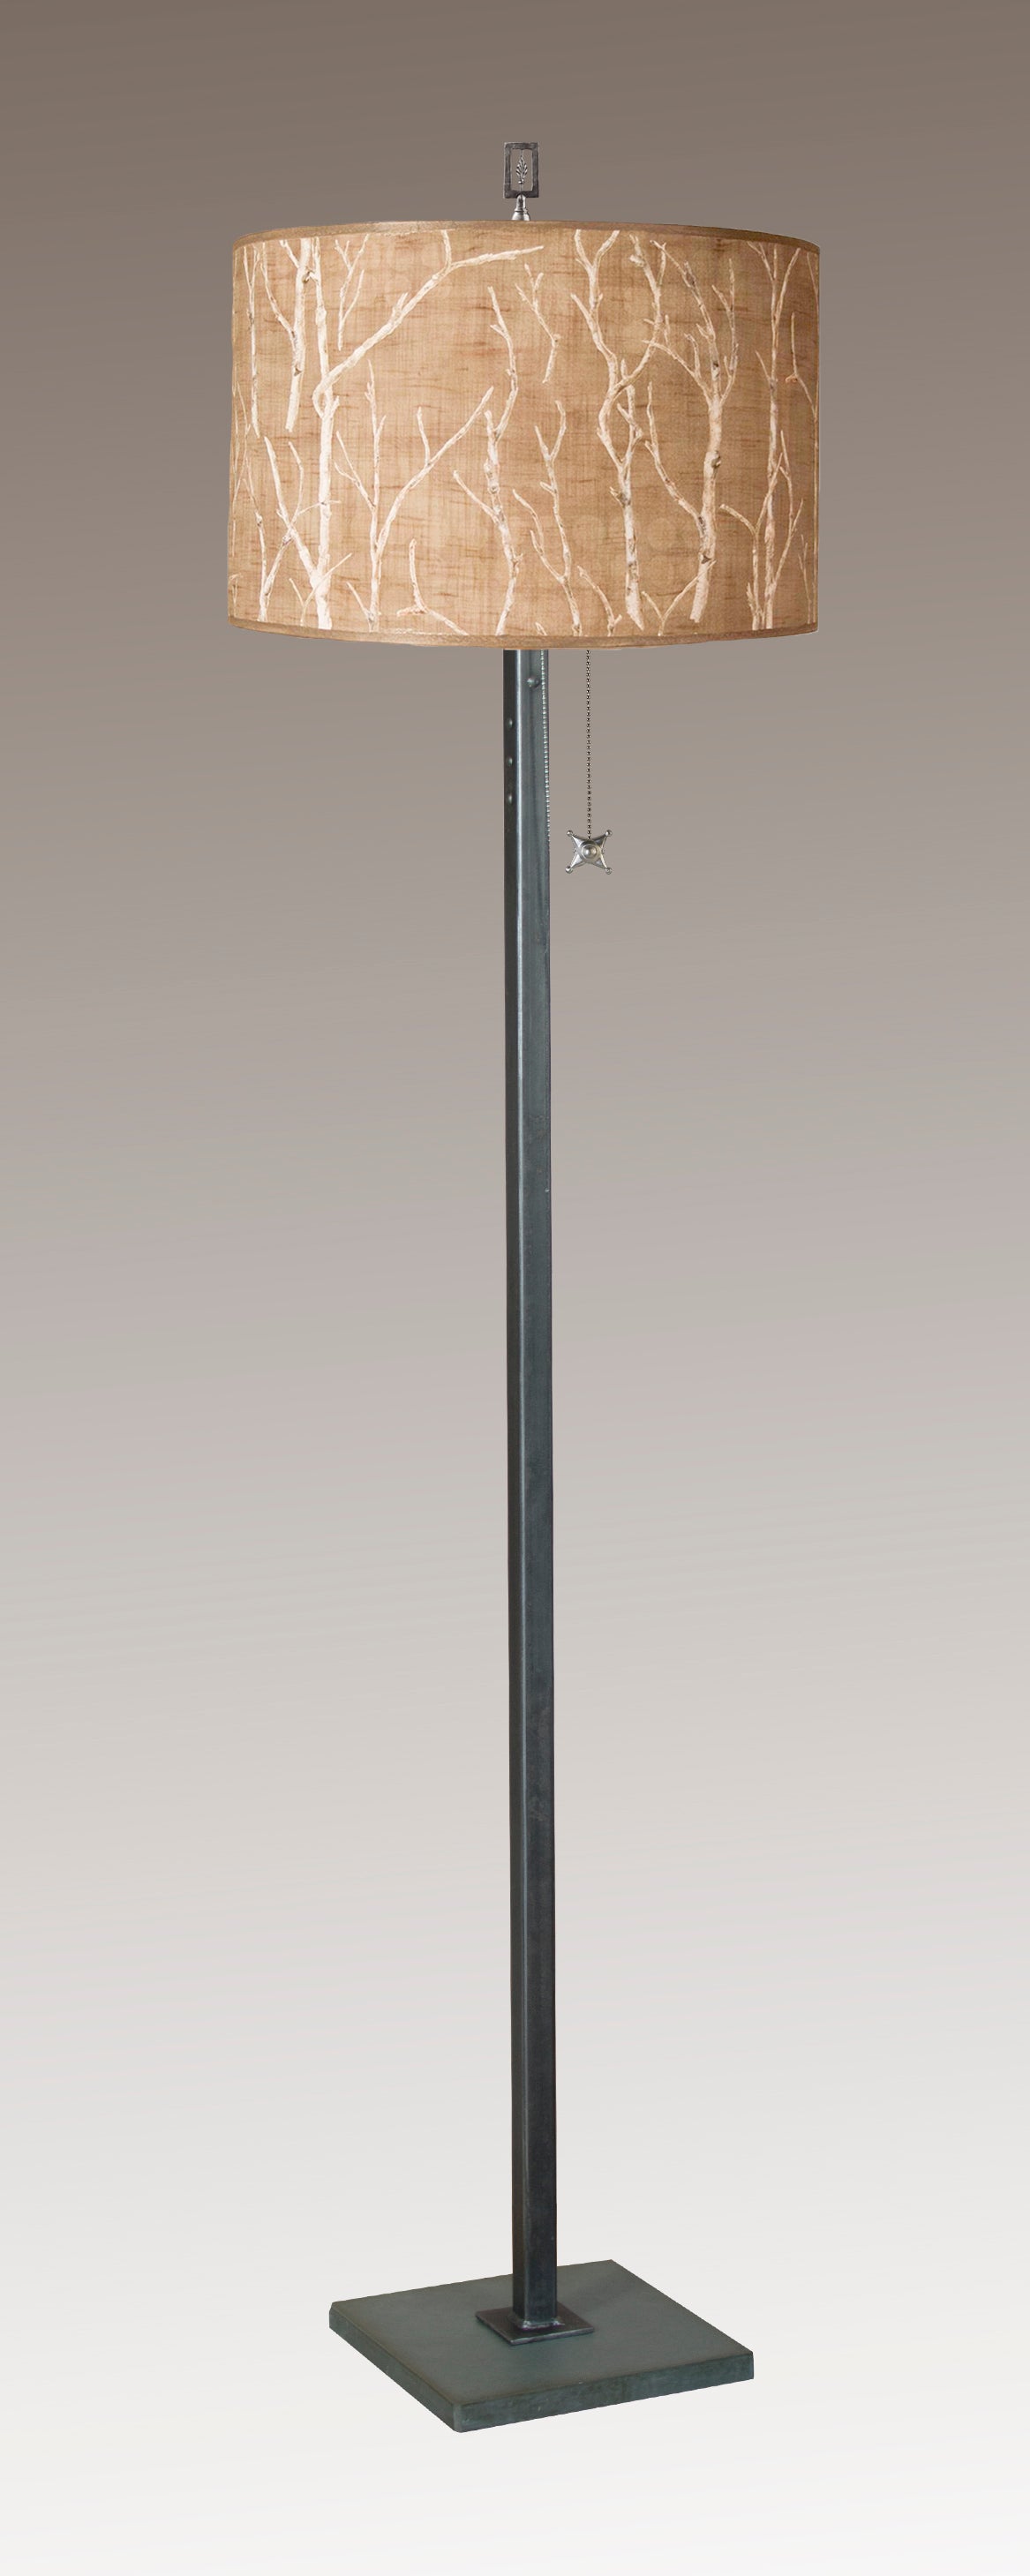 Steel Floor Lamp with Large Drum Shade in Twigs